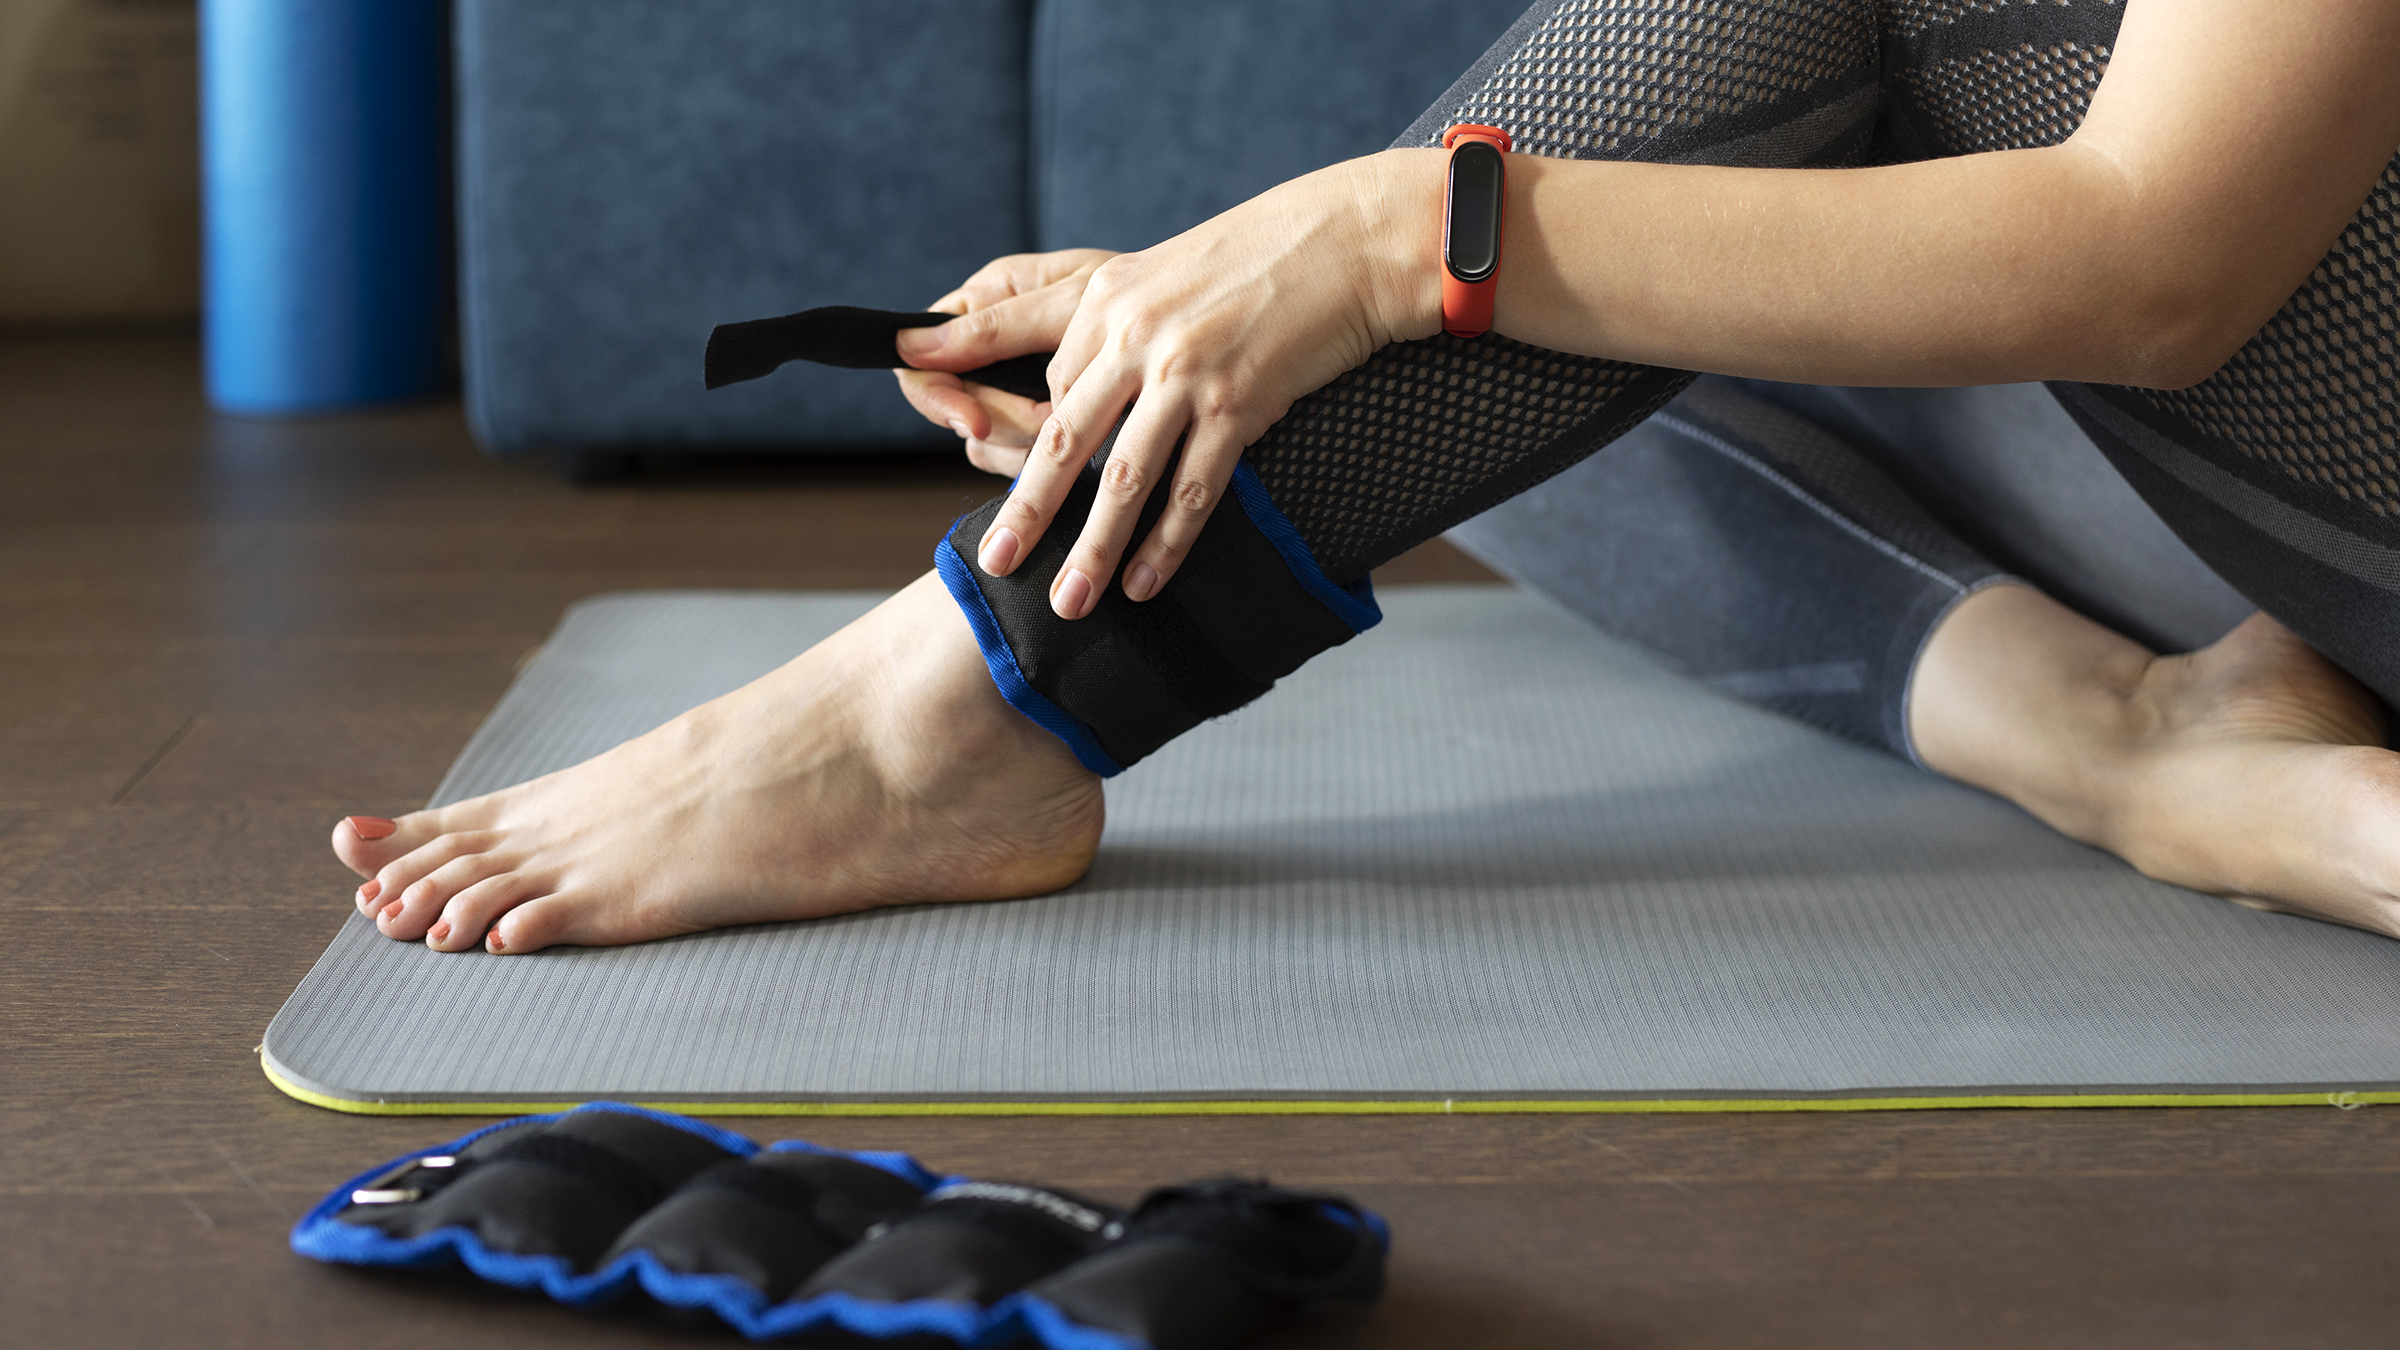 Wearable Weights Explained: Do Wrist and Ankle Work? - GoodRx